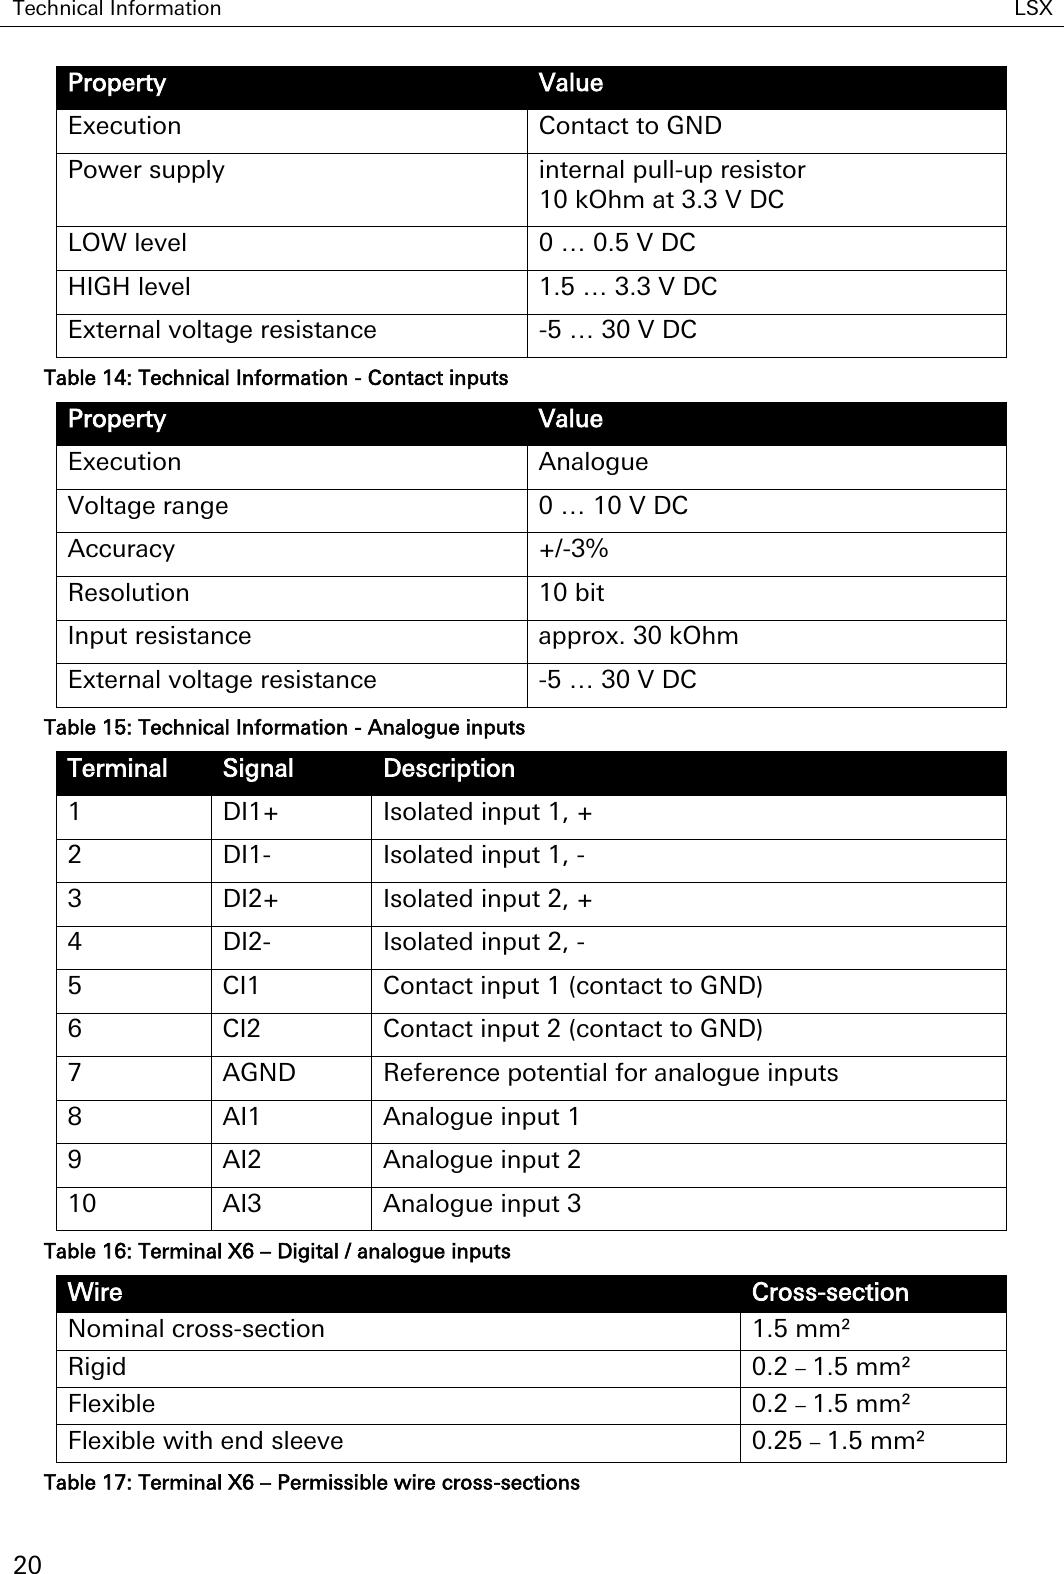 Technical Information LSX   20 Property Value Execution Contact to GND Power supply internal pull-up resistor  10 kOhm at 3.3 V DC LOW level 0 … 0.5 V DC HIGH level 1.5 … 3.3 V DC External voltage resistance -5 … 30 V DC Table 14: Technical Information - Contact inputs Property Value Execution Analogue Voltage range 0 … 10 V DC Accuracy +/-3% Resolution 10 bit Input resistance approx. 30 kOhm External voltage resistance -5 … 30 V DC Table 15: Technical Information - Analogue inputs Terminal Signal Description 1 DI1+ Isolated input 1, + 2 DI1- Isolated input 1, - 3 DI2+ Isolated input 2, + 4 DI2- Isolated input 2, - 5 CI1 Contact input 1 (contact to GND) 6 CI2 Contact input 2 (contact to GND) 7 AGND Reference potential for analogue inputs 8 AI1 Analogue input 1 9 AI2 Analogue input 2 10 AI3 Analogue input 3 Table 16: Terminal X6 – Digital / analogue inputs Wire Cross-section Nominal cross-section 1.5 mm² Rigid 0.2 – 1.5 mm² Flexible 0.2 – 1.5 mm² Flexible with end sleeve 0.25 – 1.5 mm² Table 17: Terminal X6 – Permissible wire cross-sections 